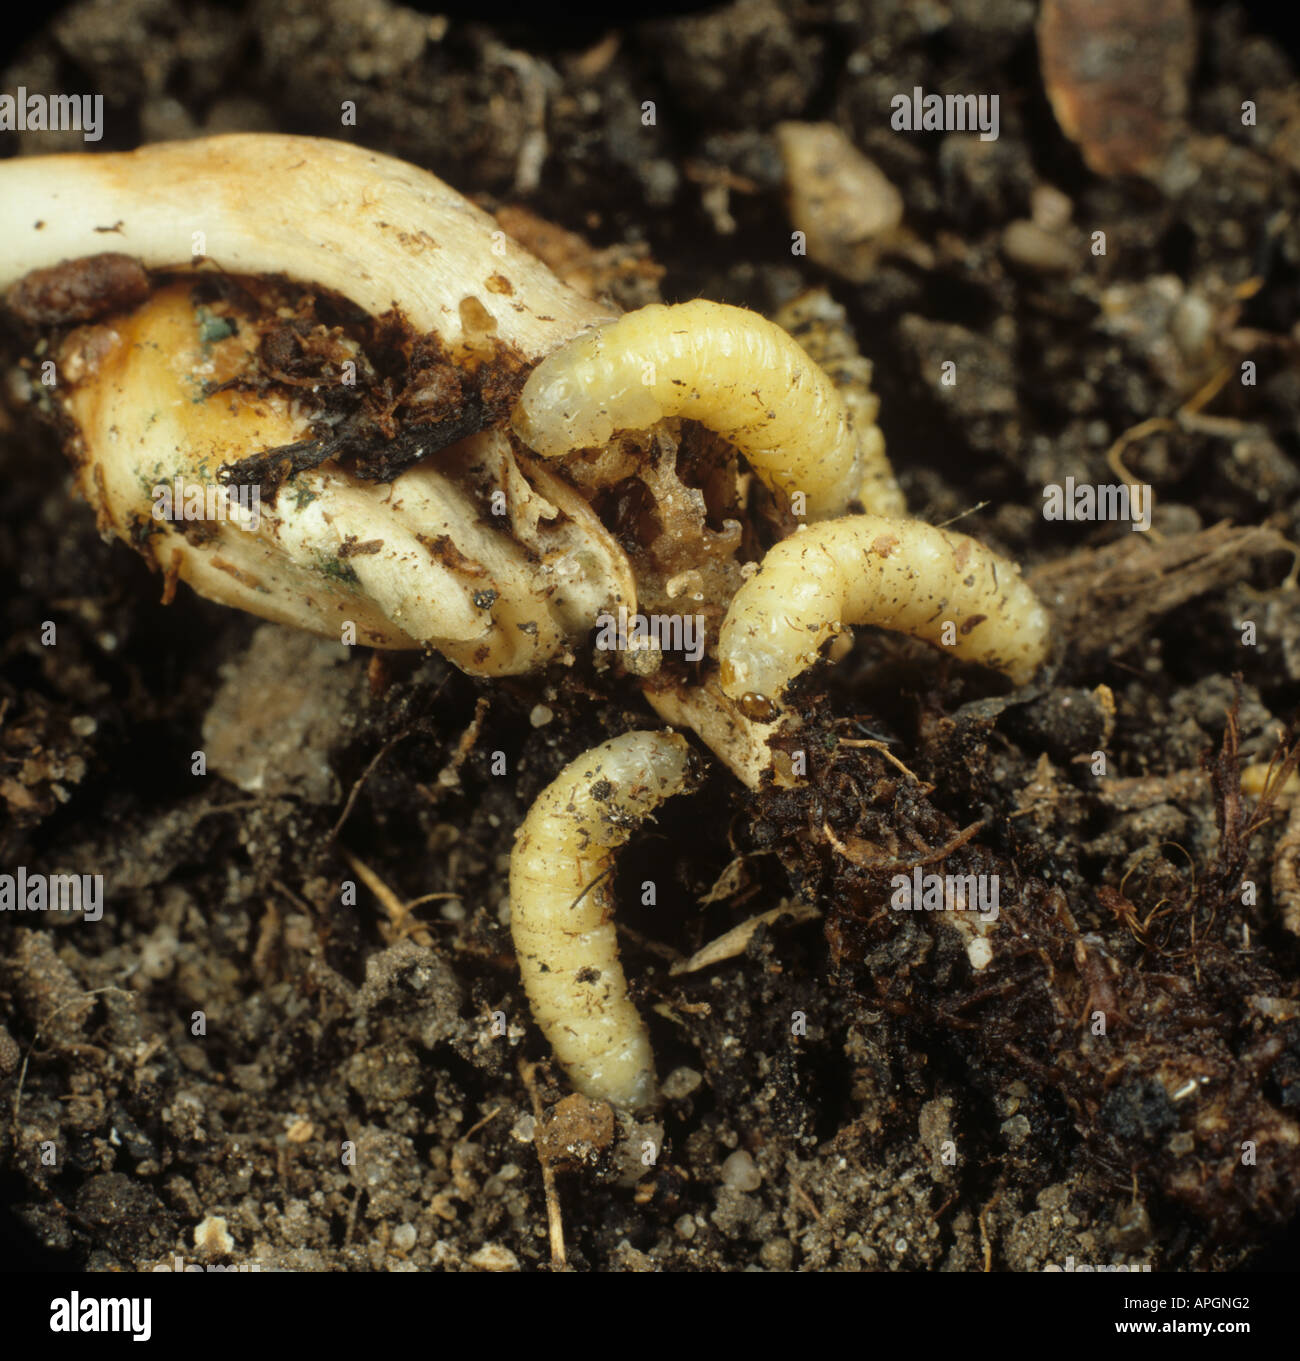 Corn rootworm Diabrotica spp beetle larvae feeding on maize root and seed Stock Photo